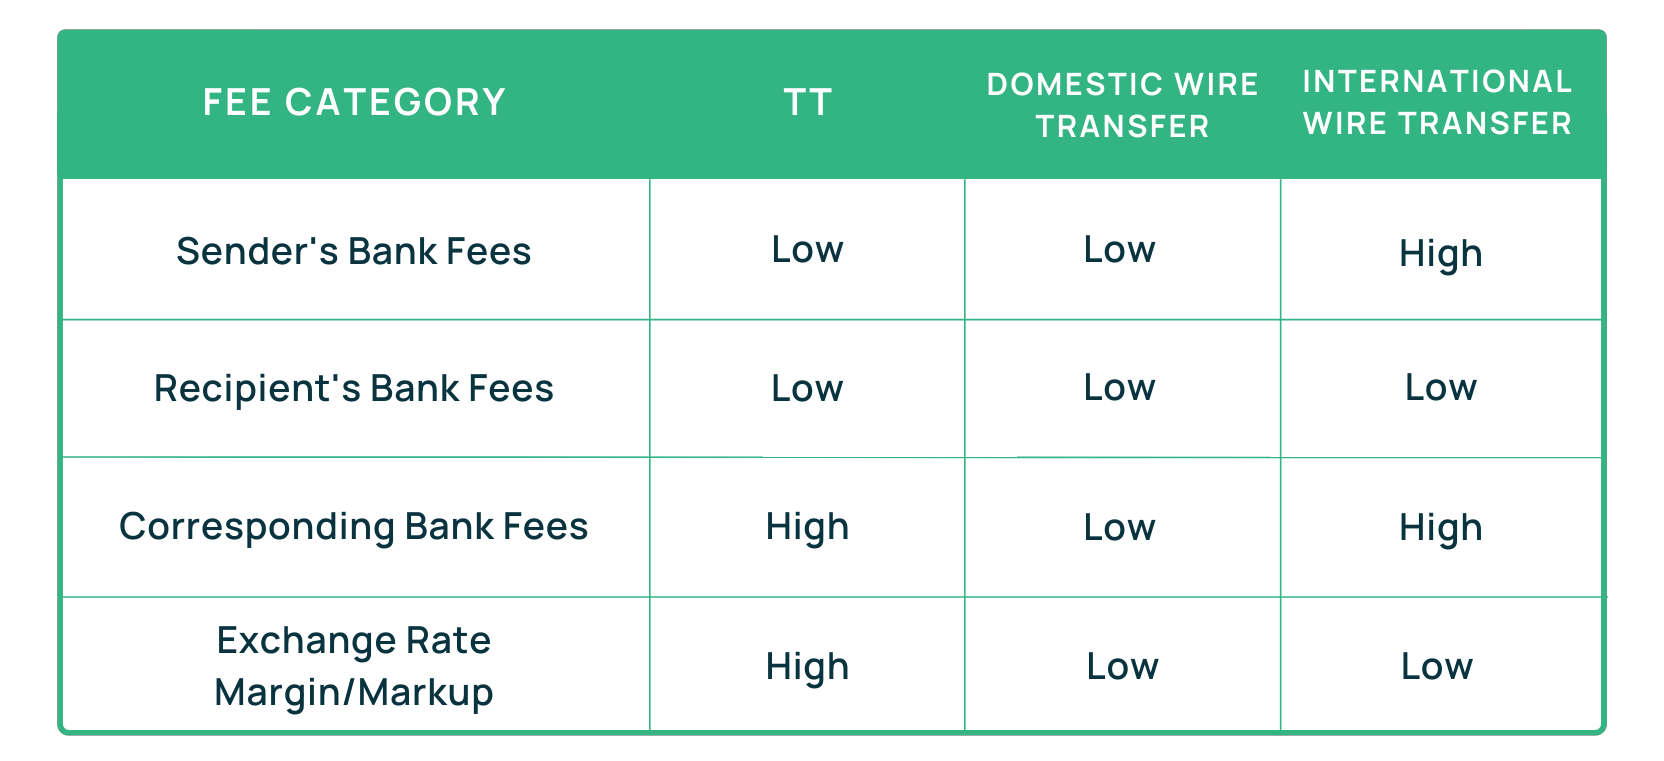 Telegraphic Transfer (TT) vs Wire Transfer: Are They the Same?